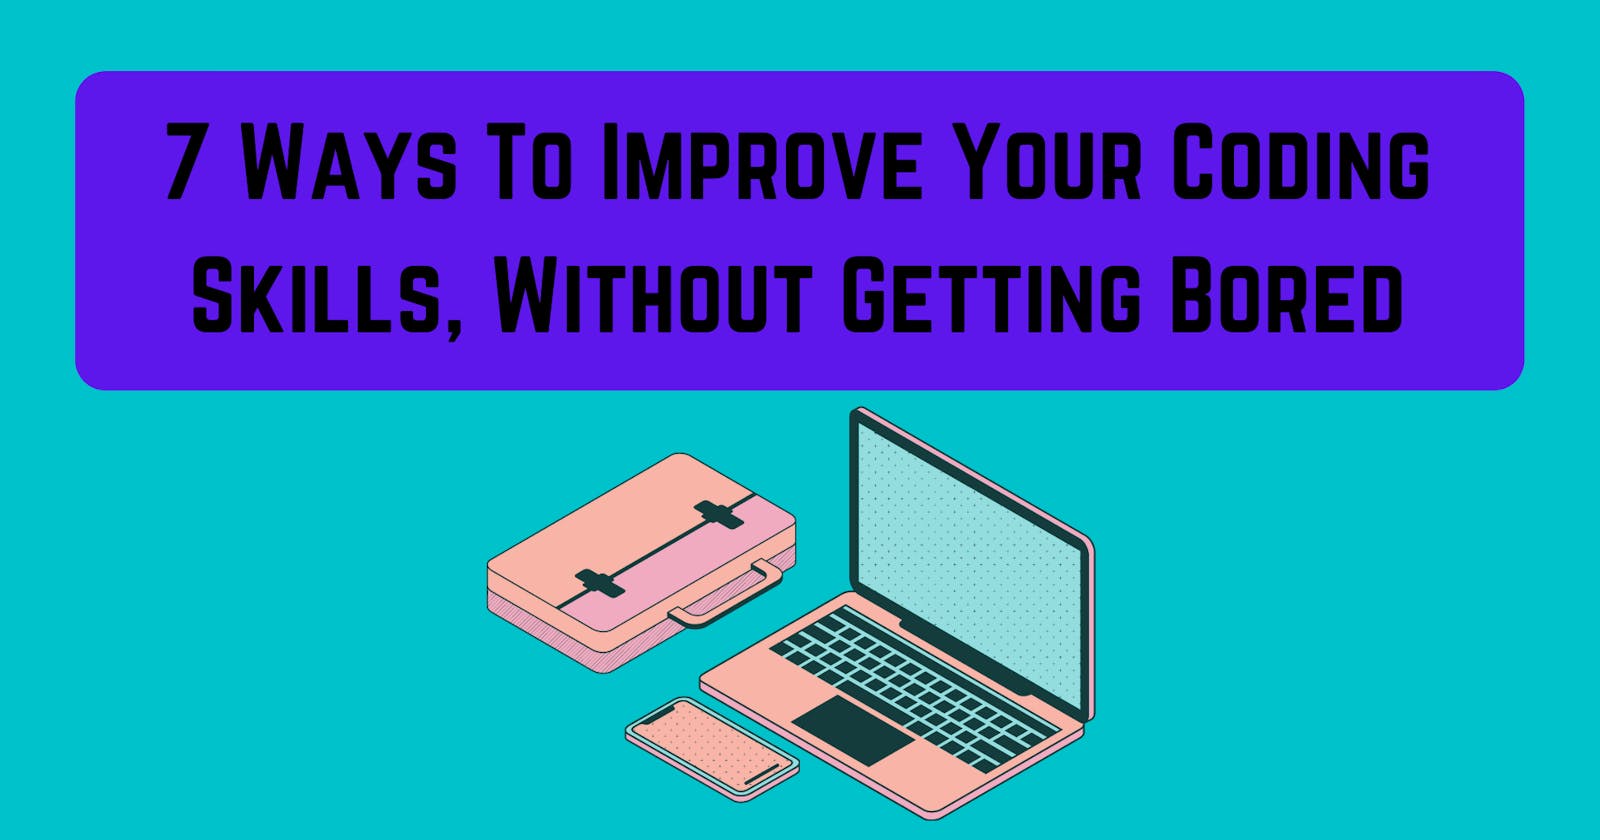 7 Ways To Improve Your Coding Skills, Without Getting Bored